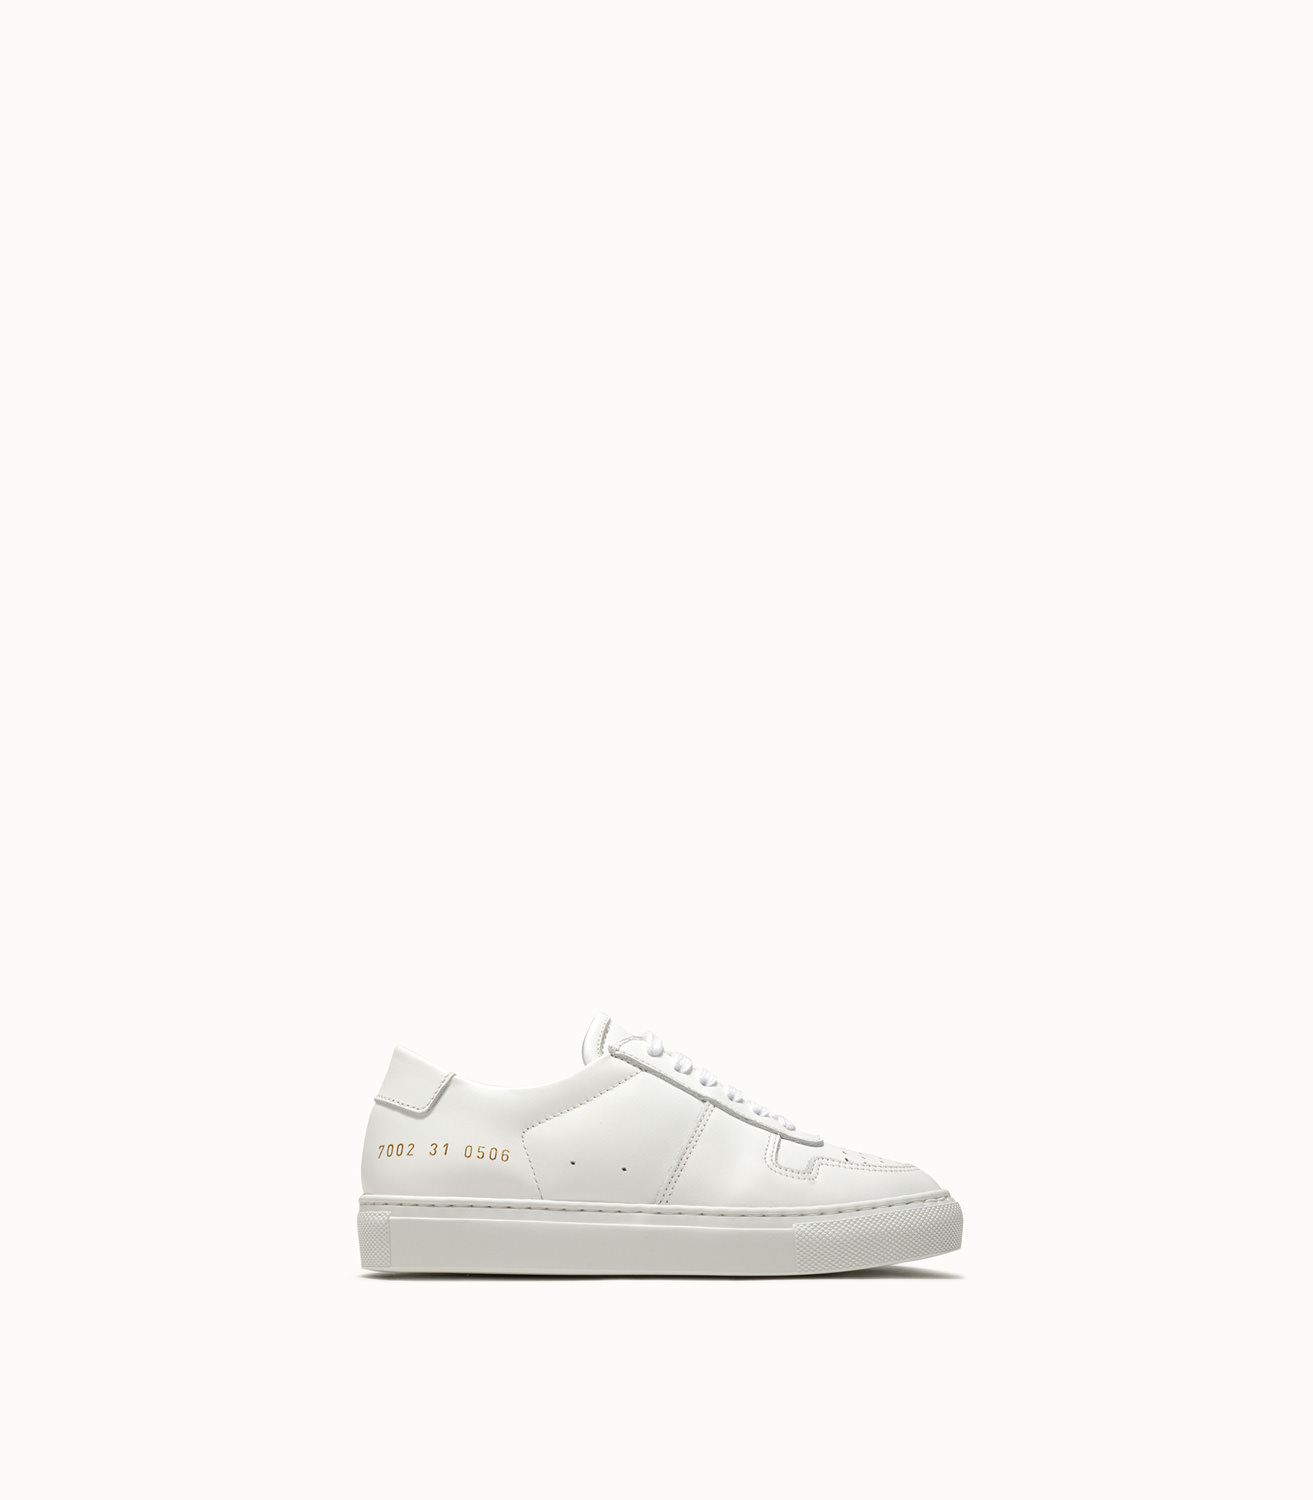 COMMON PROJECTS BBALL LOW SNEAKERS 7002 